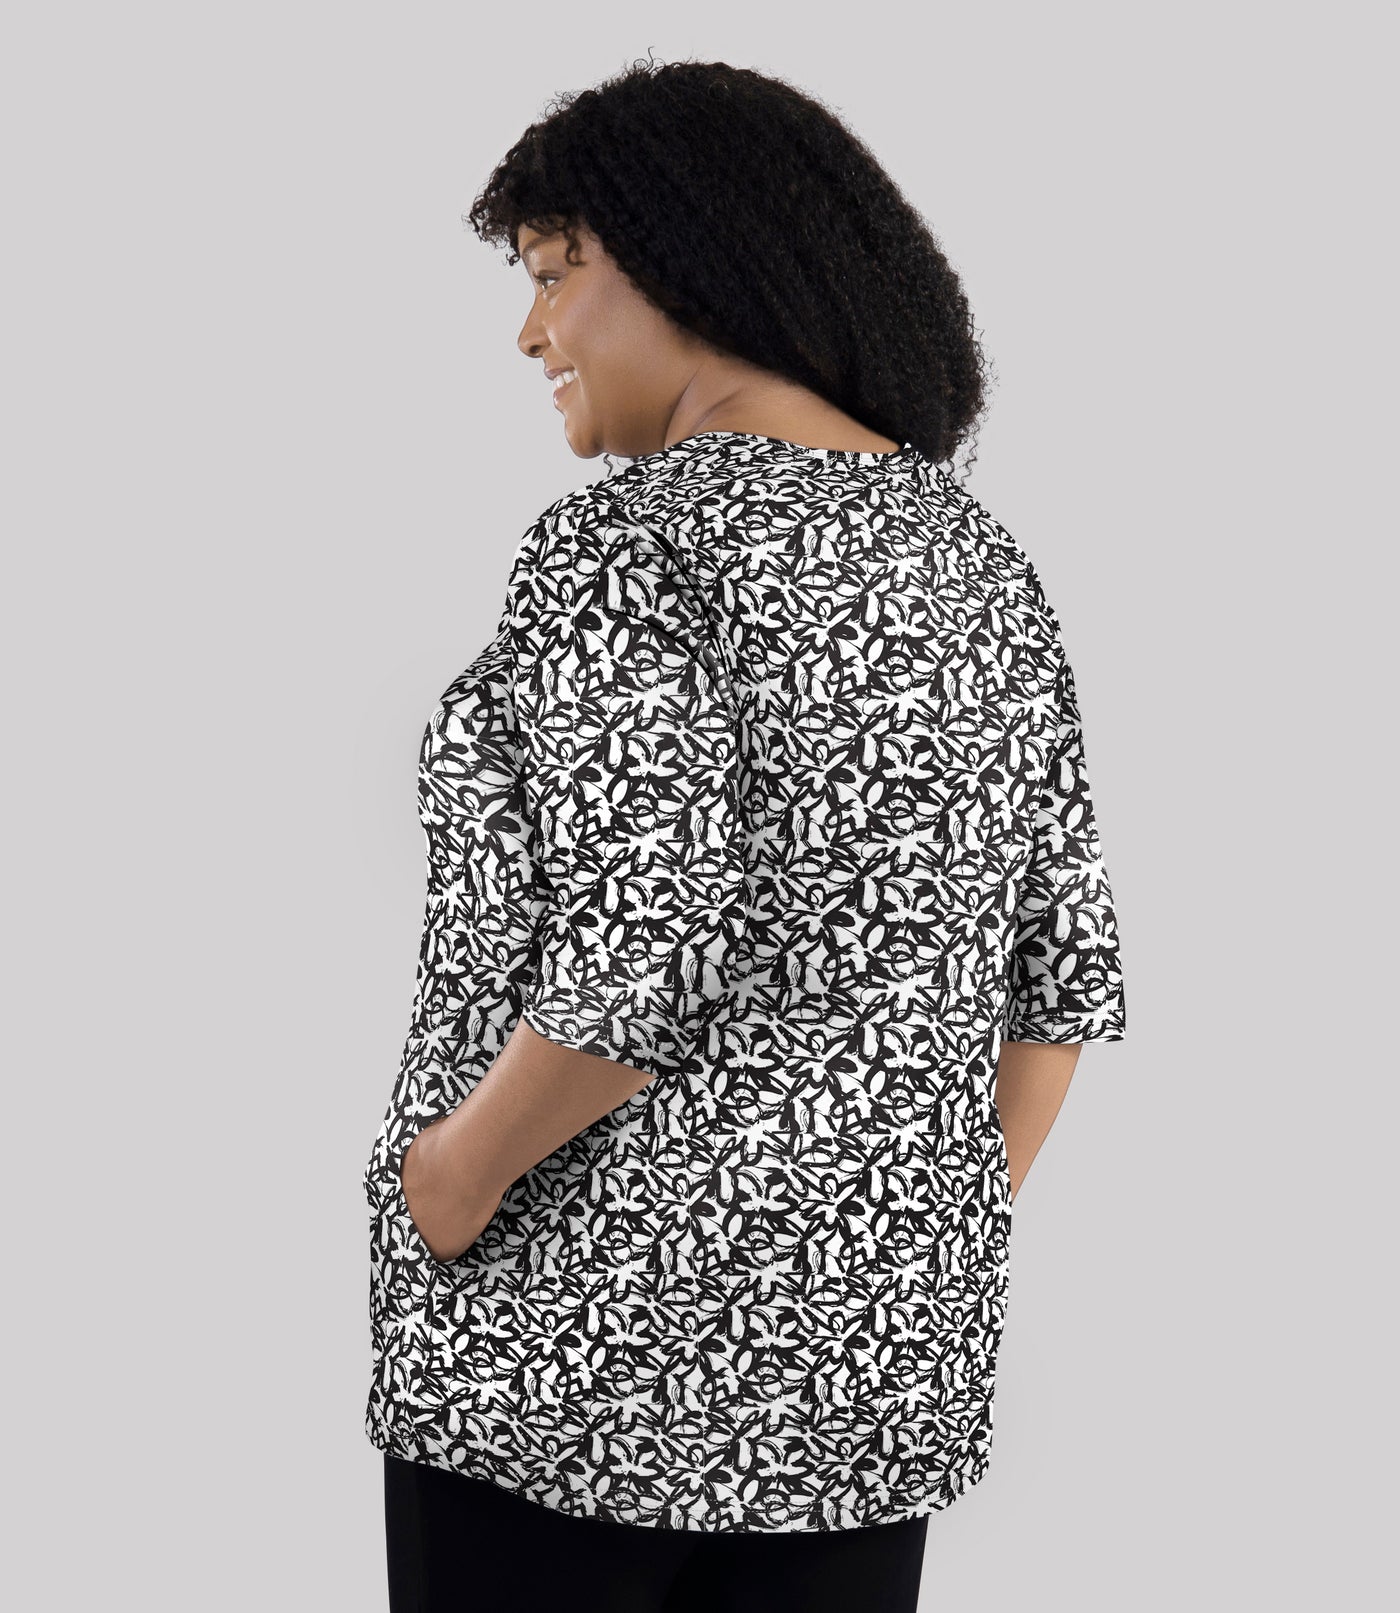 Model, facing back, wearing JunoActive's Junonia Lifestyle Cotton Printed 3/4 sleeve pocket tunic in pattern black and white wildflower. Her left hand is in left pocket of shirt.